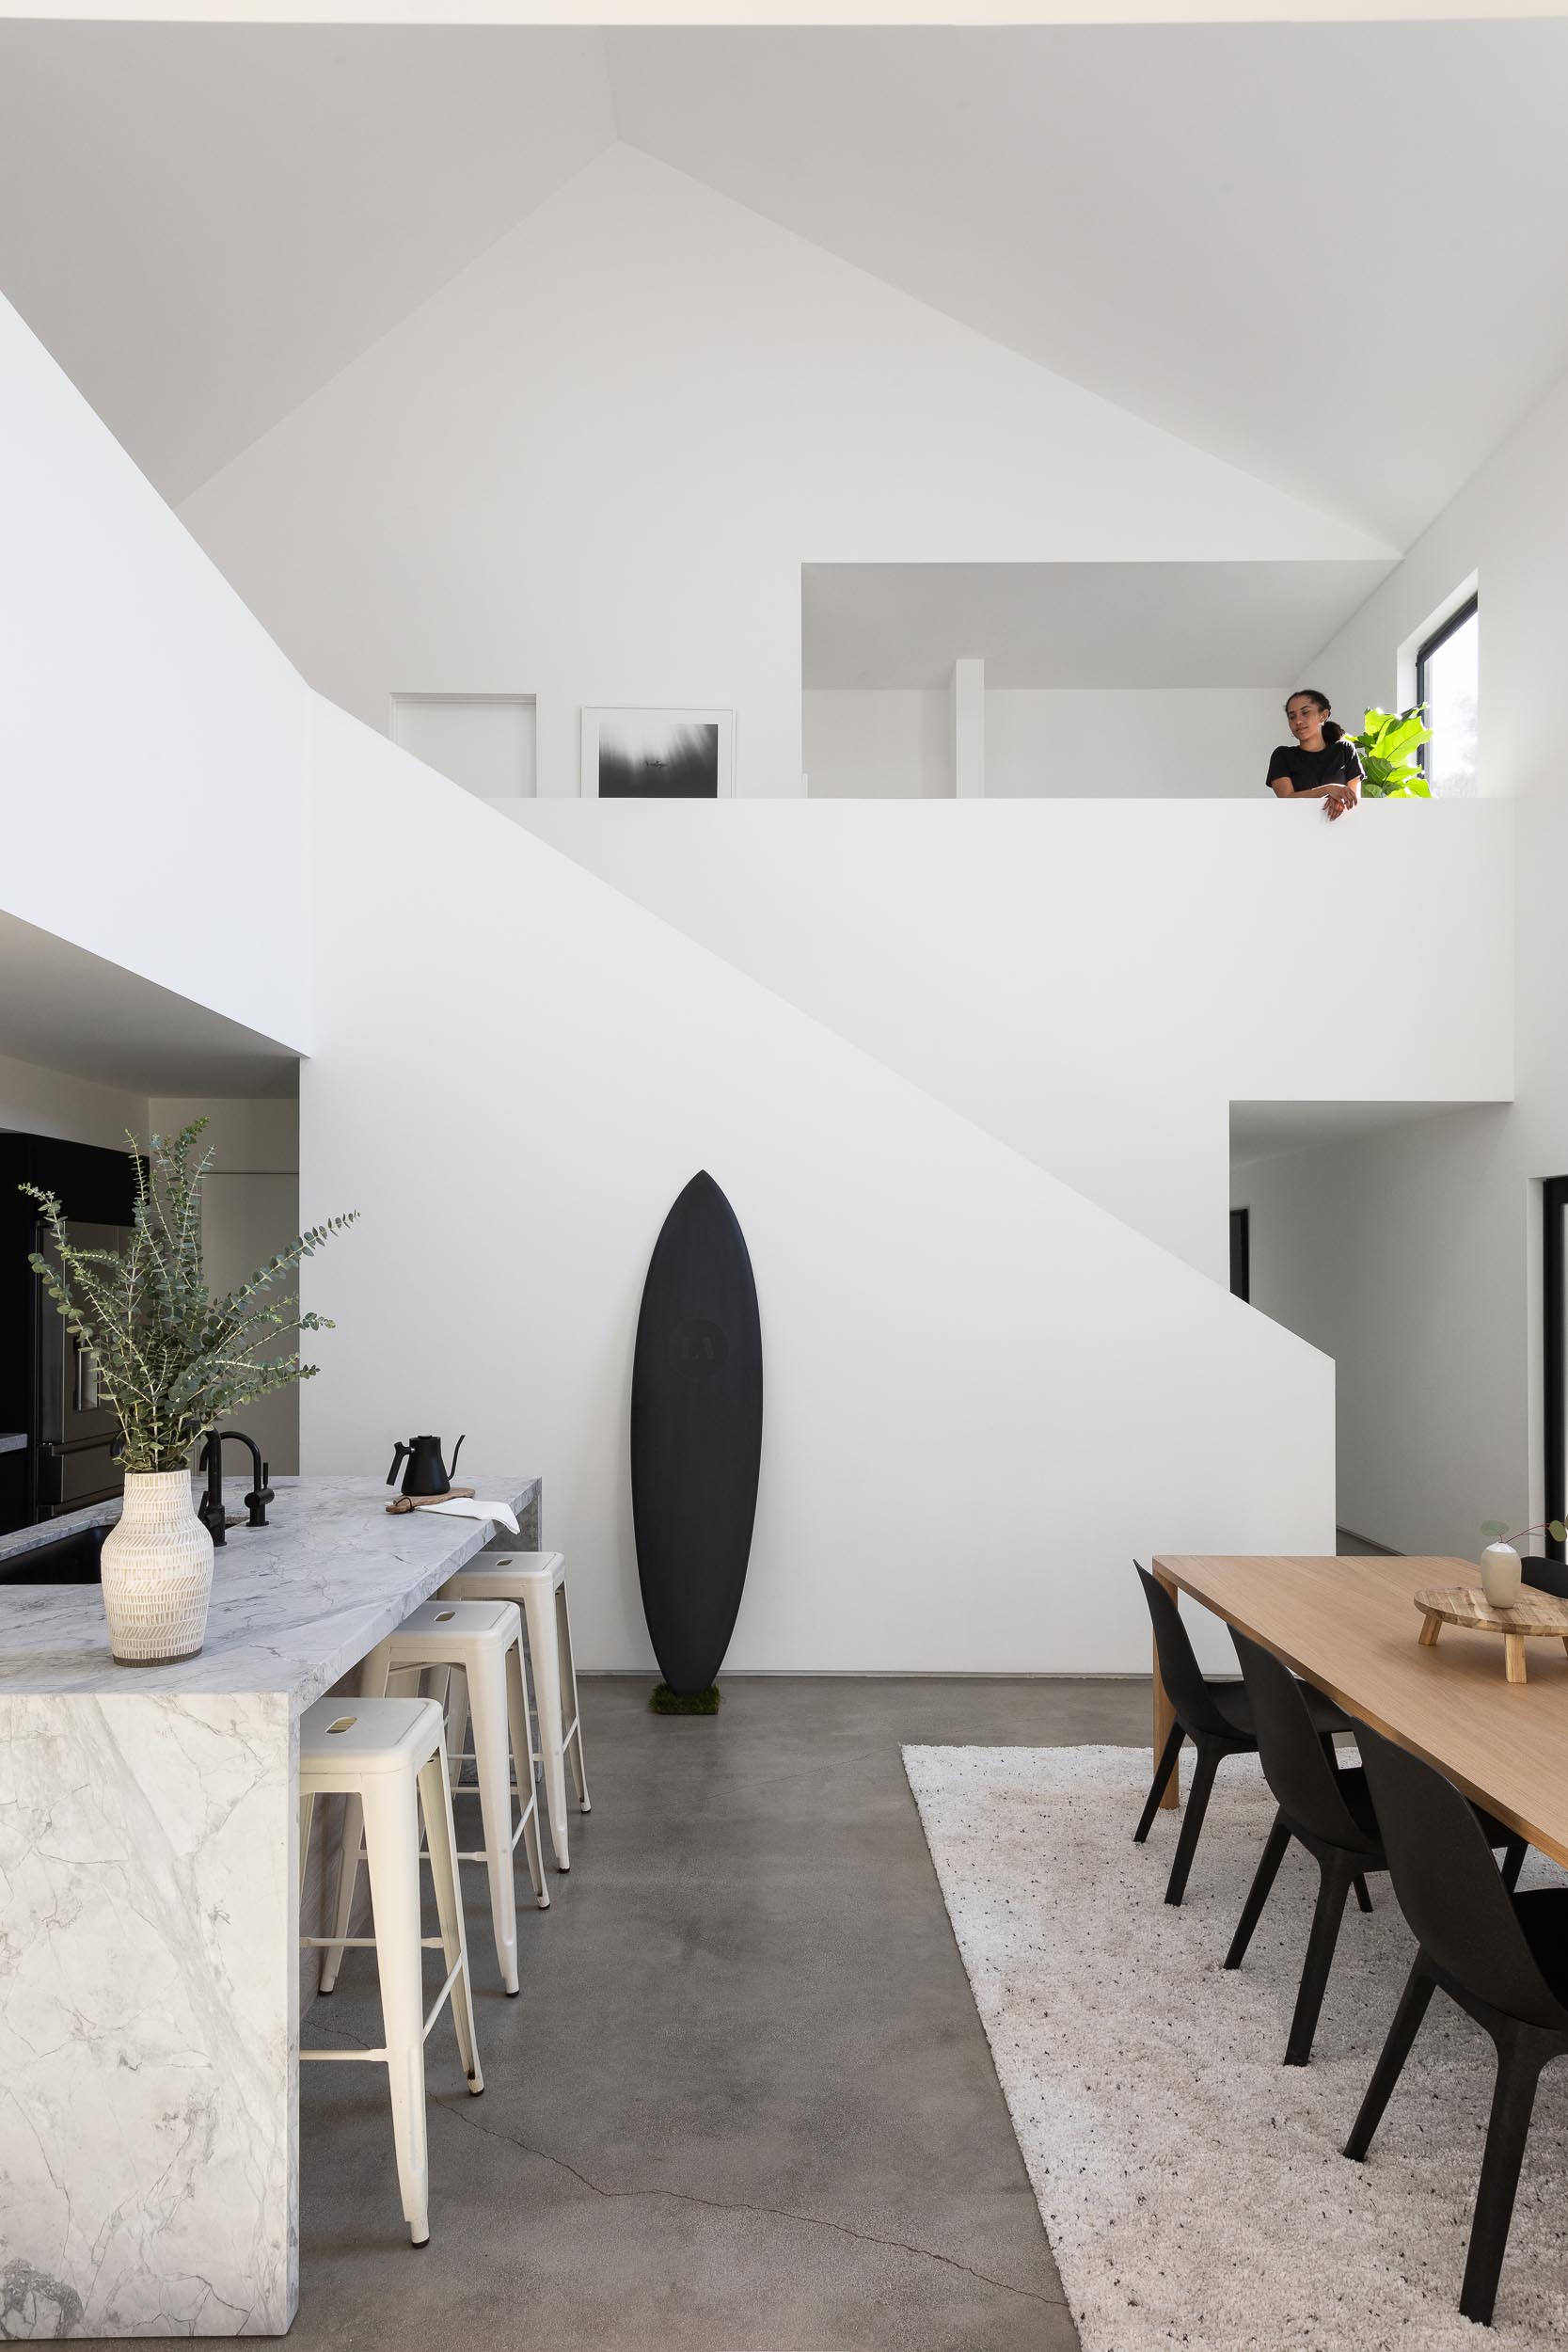 This modern home interior has the dining room next to the kitchen island, which was designed with with room for seating, while the kitchen has matte black lower cabinets and light wood upper cabinets.